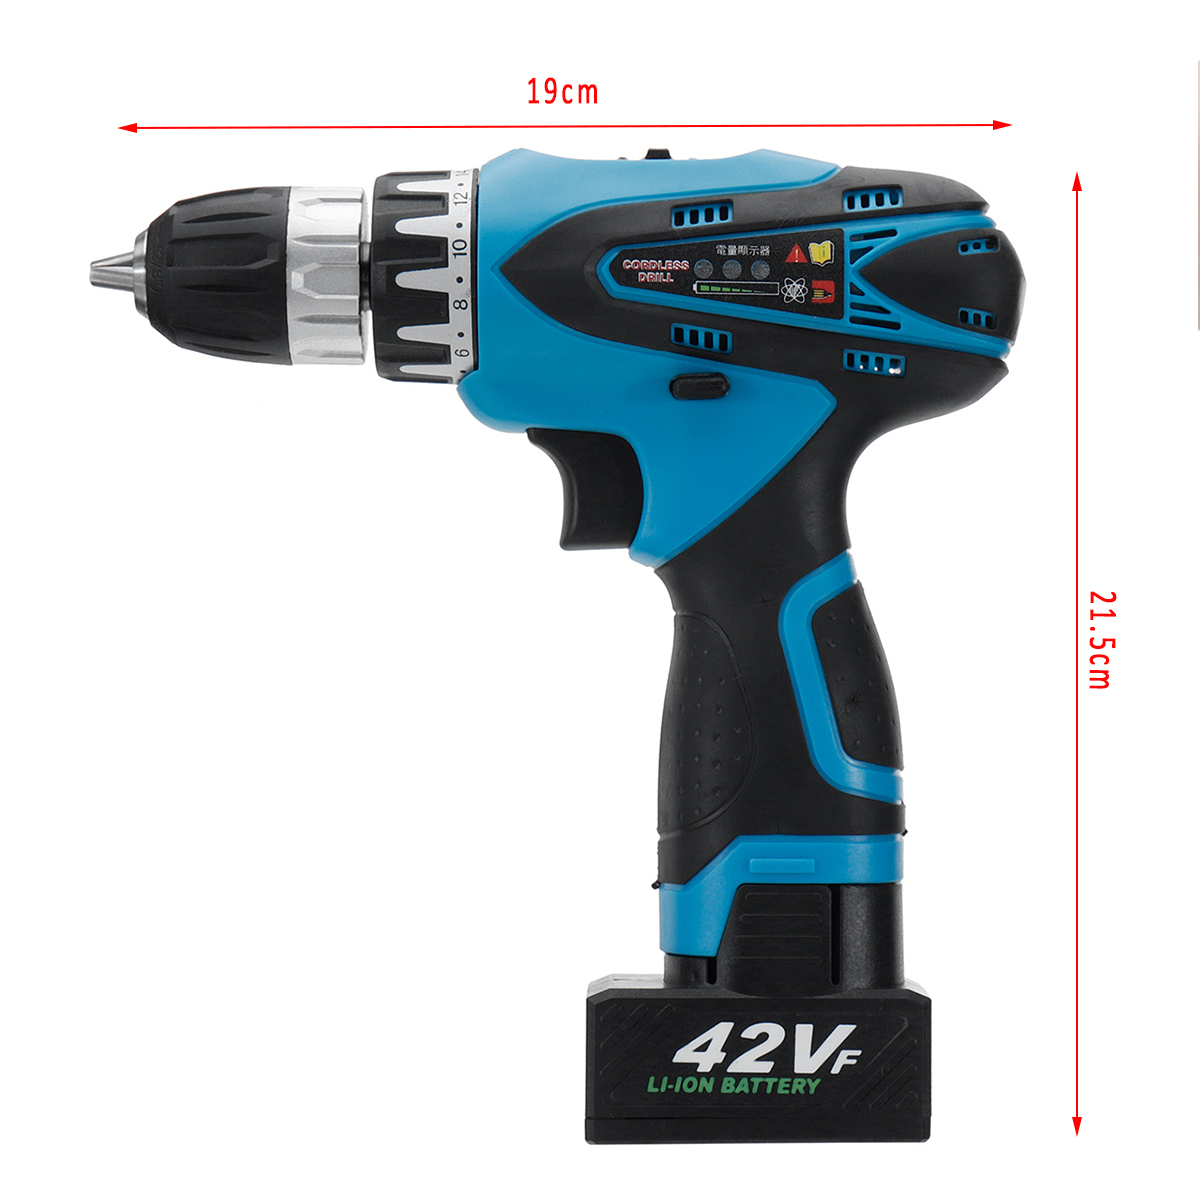 42V-9000mAh-Electric-Cordless-Drill-Driver-LED-2-Speed-Screwdriver-W-1-or-2-Li-Ion-Battery-1451594-6